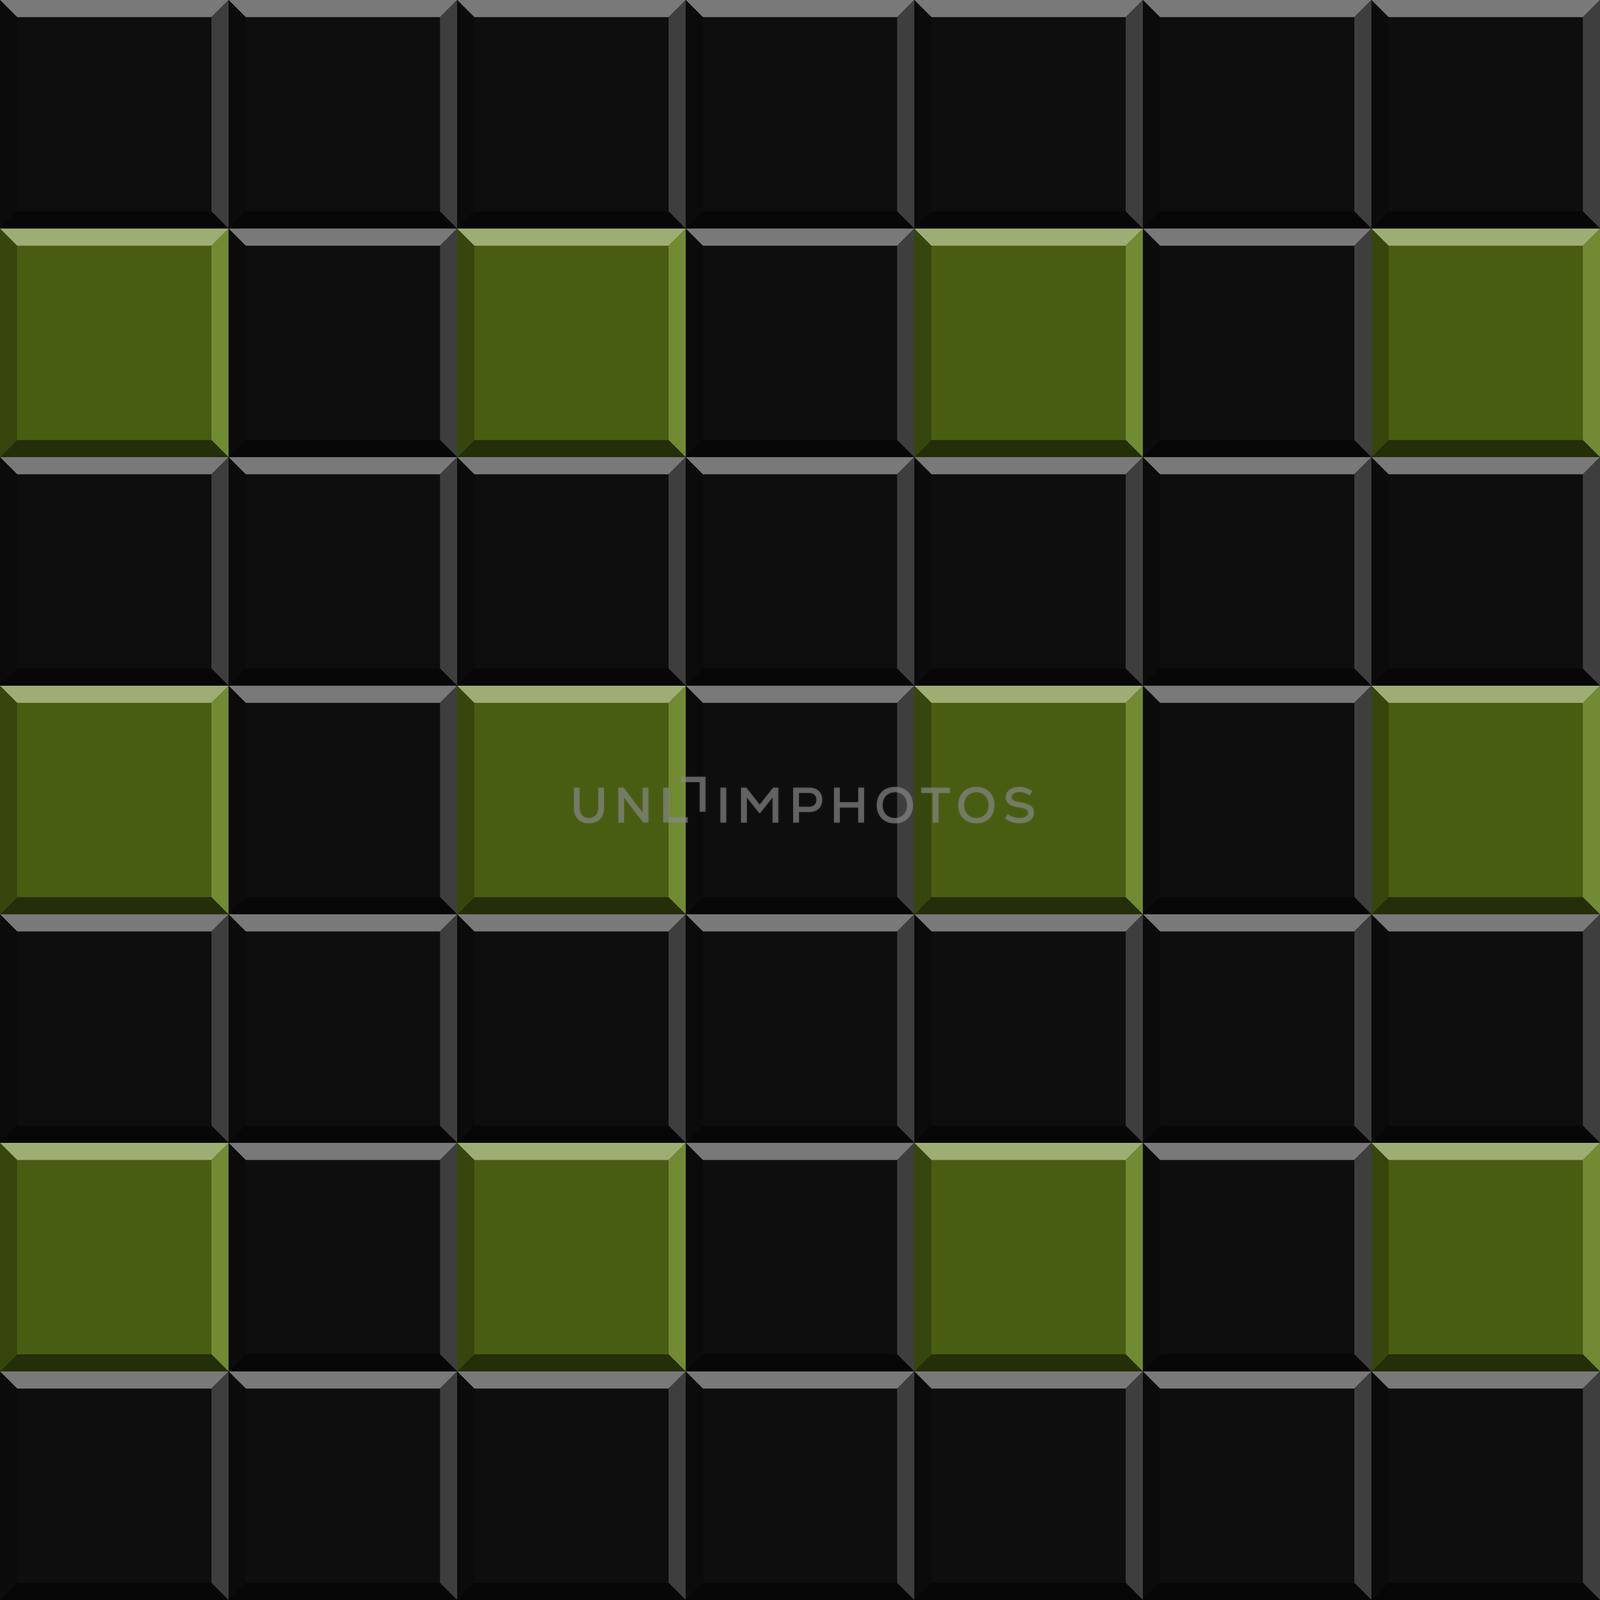 Black and shades of green bricks pattern on solid sheet of wallpaper. Concept of home decor and interior designing by tabishere